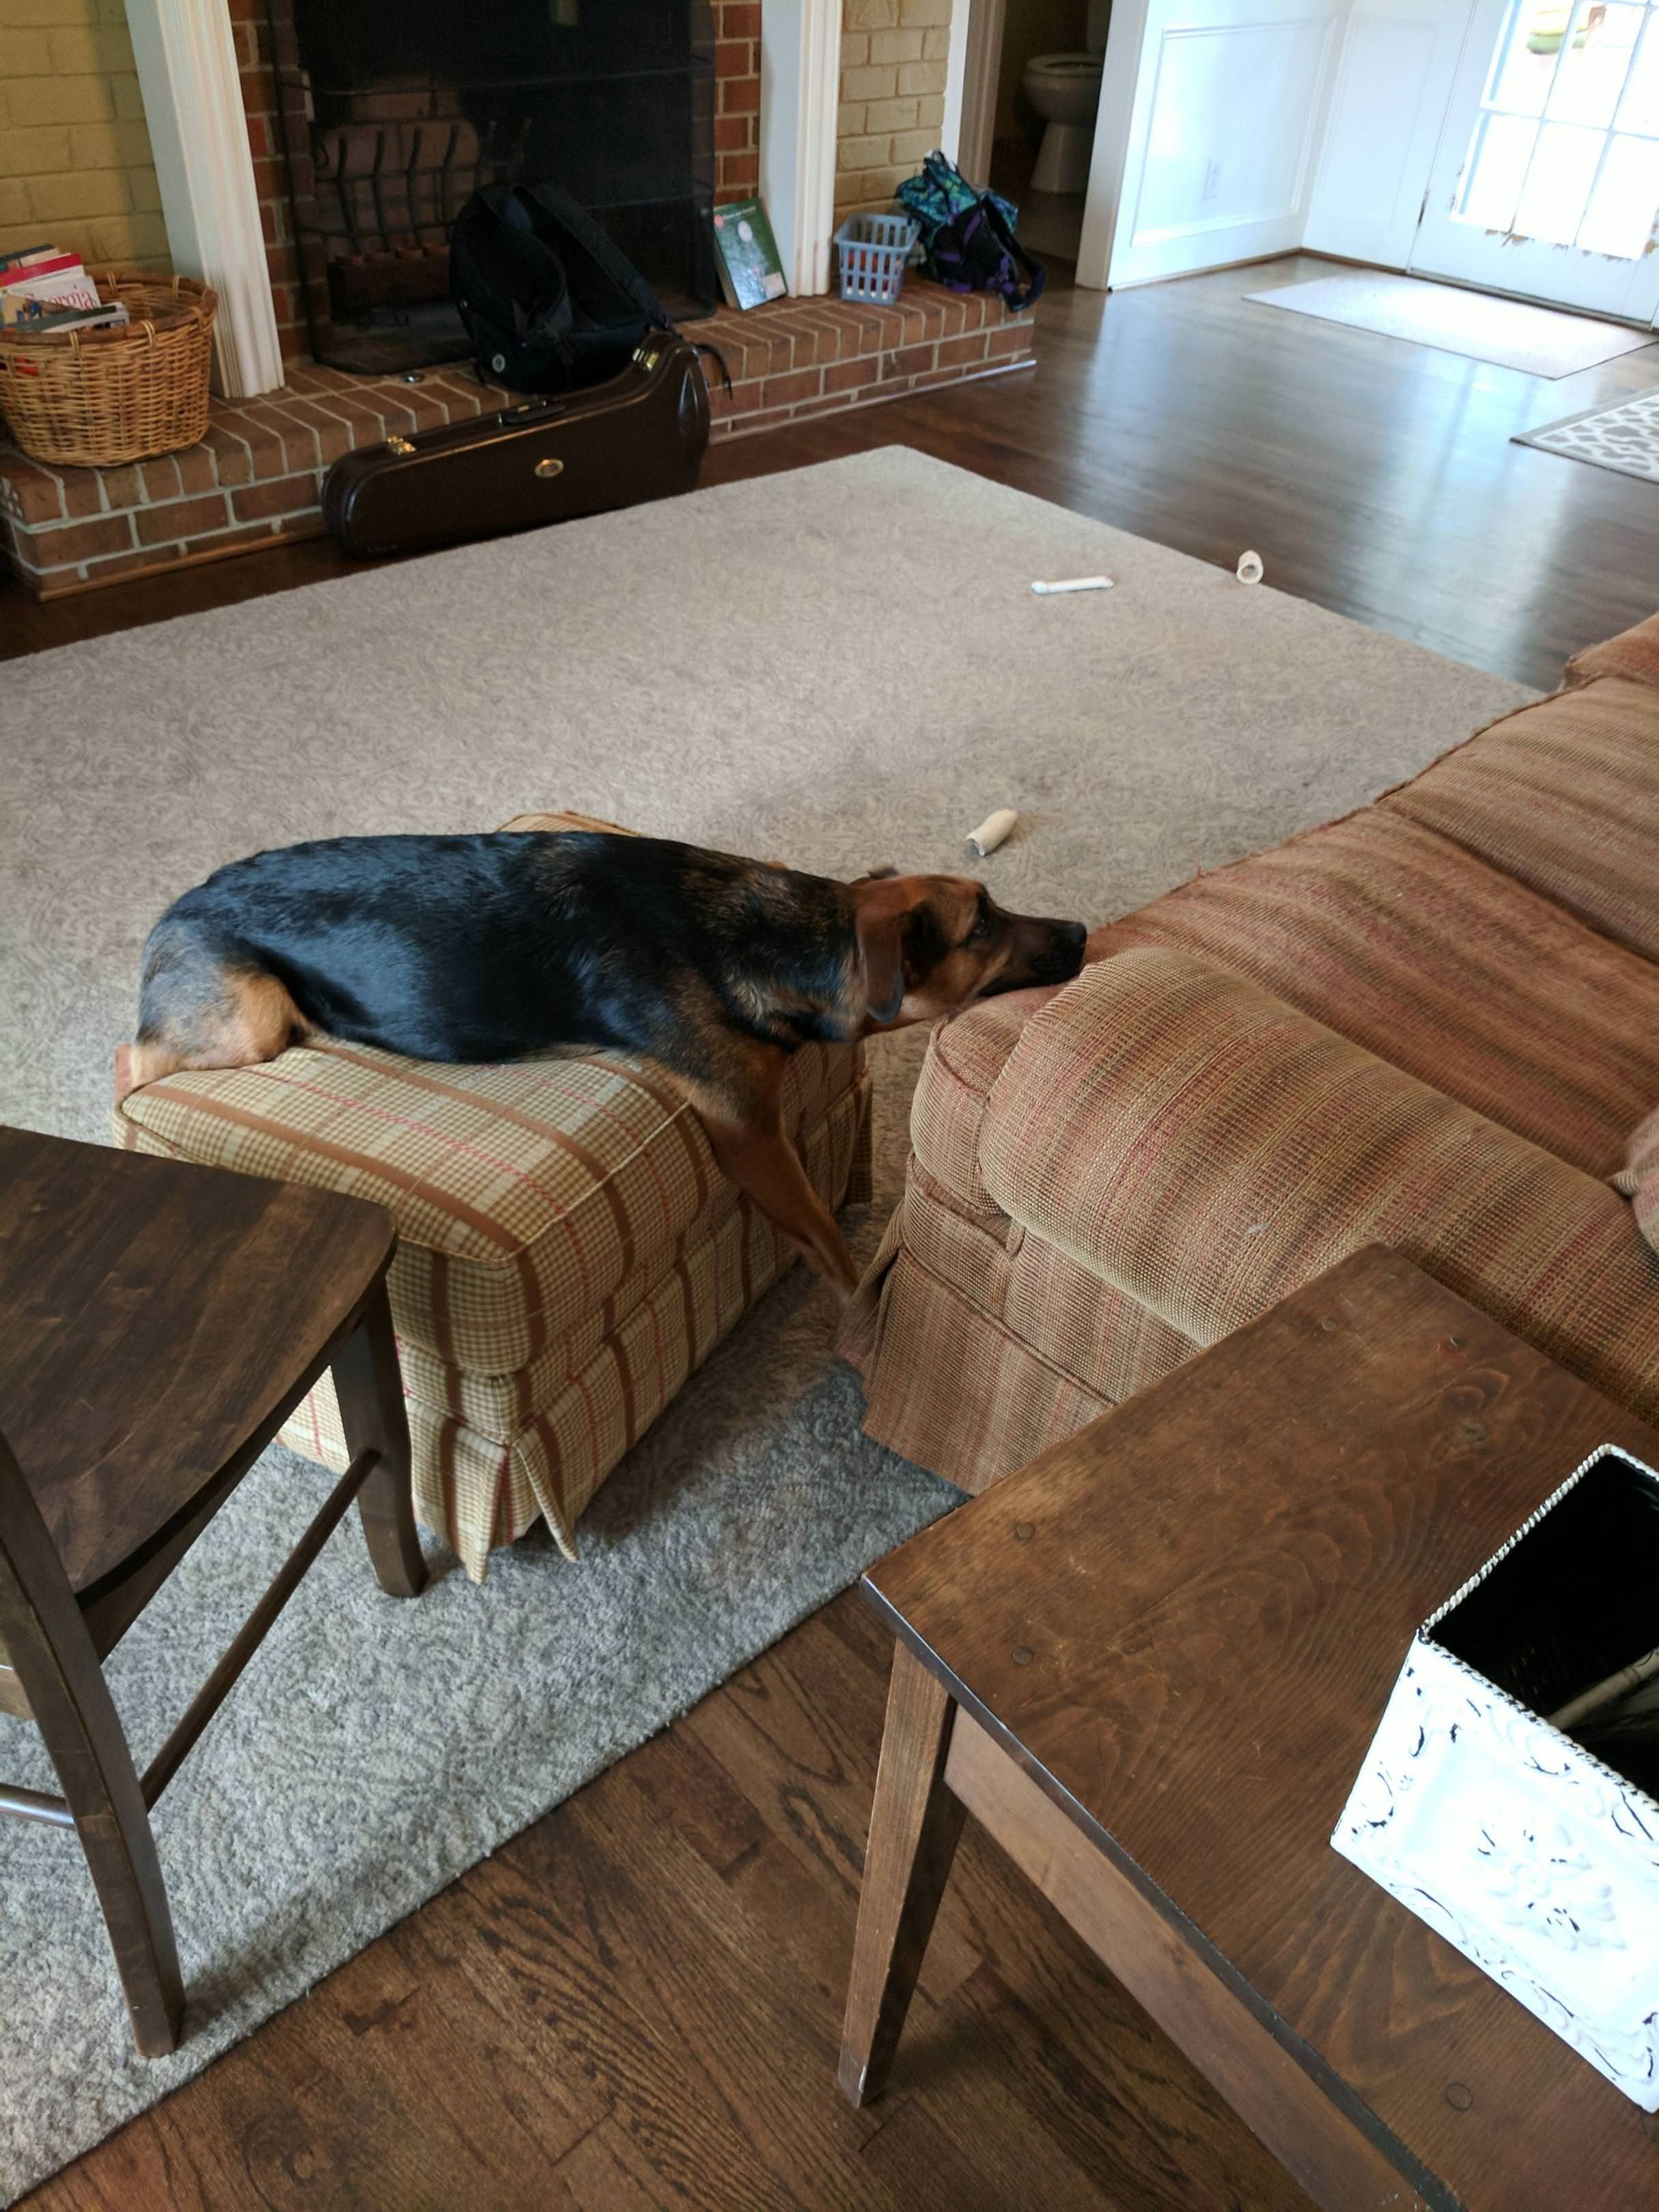 My dog isn't allowed on the couch. This is his solution.